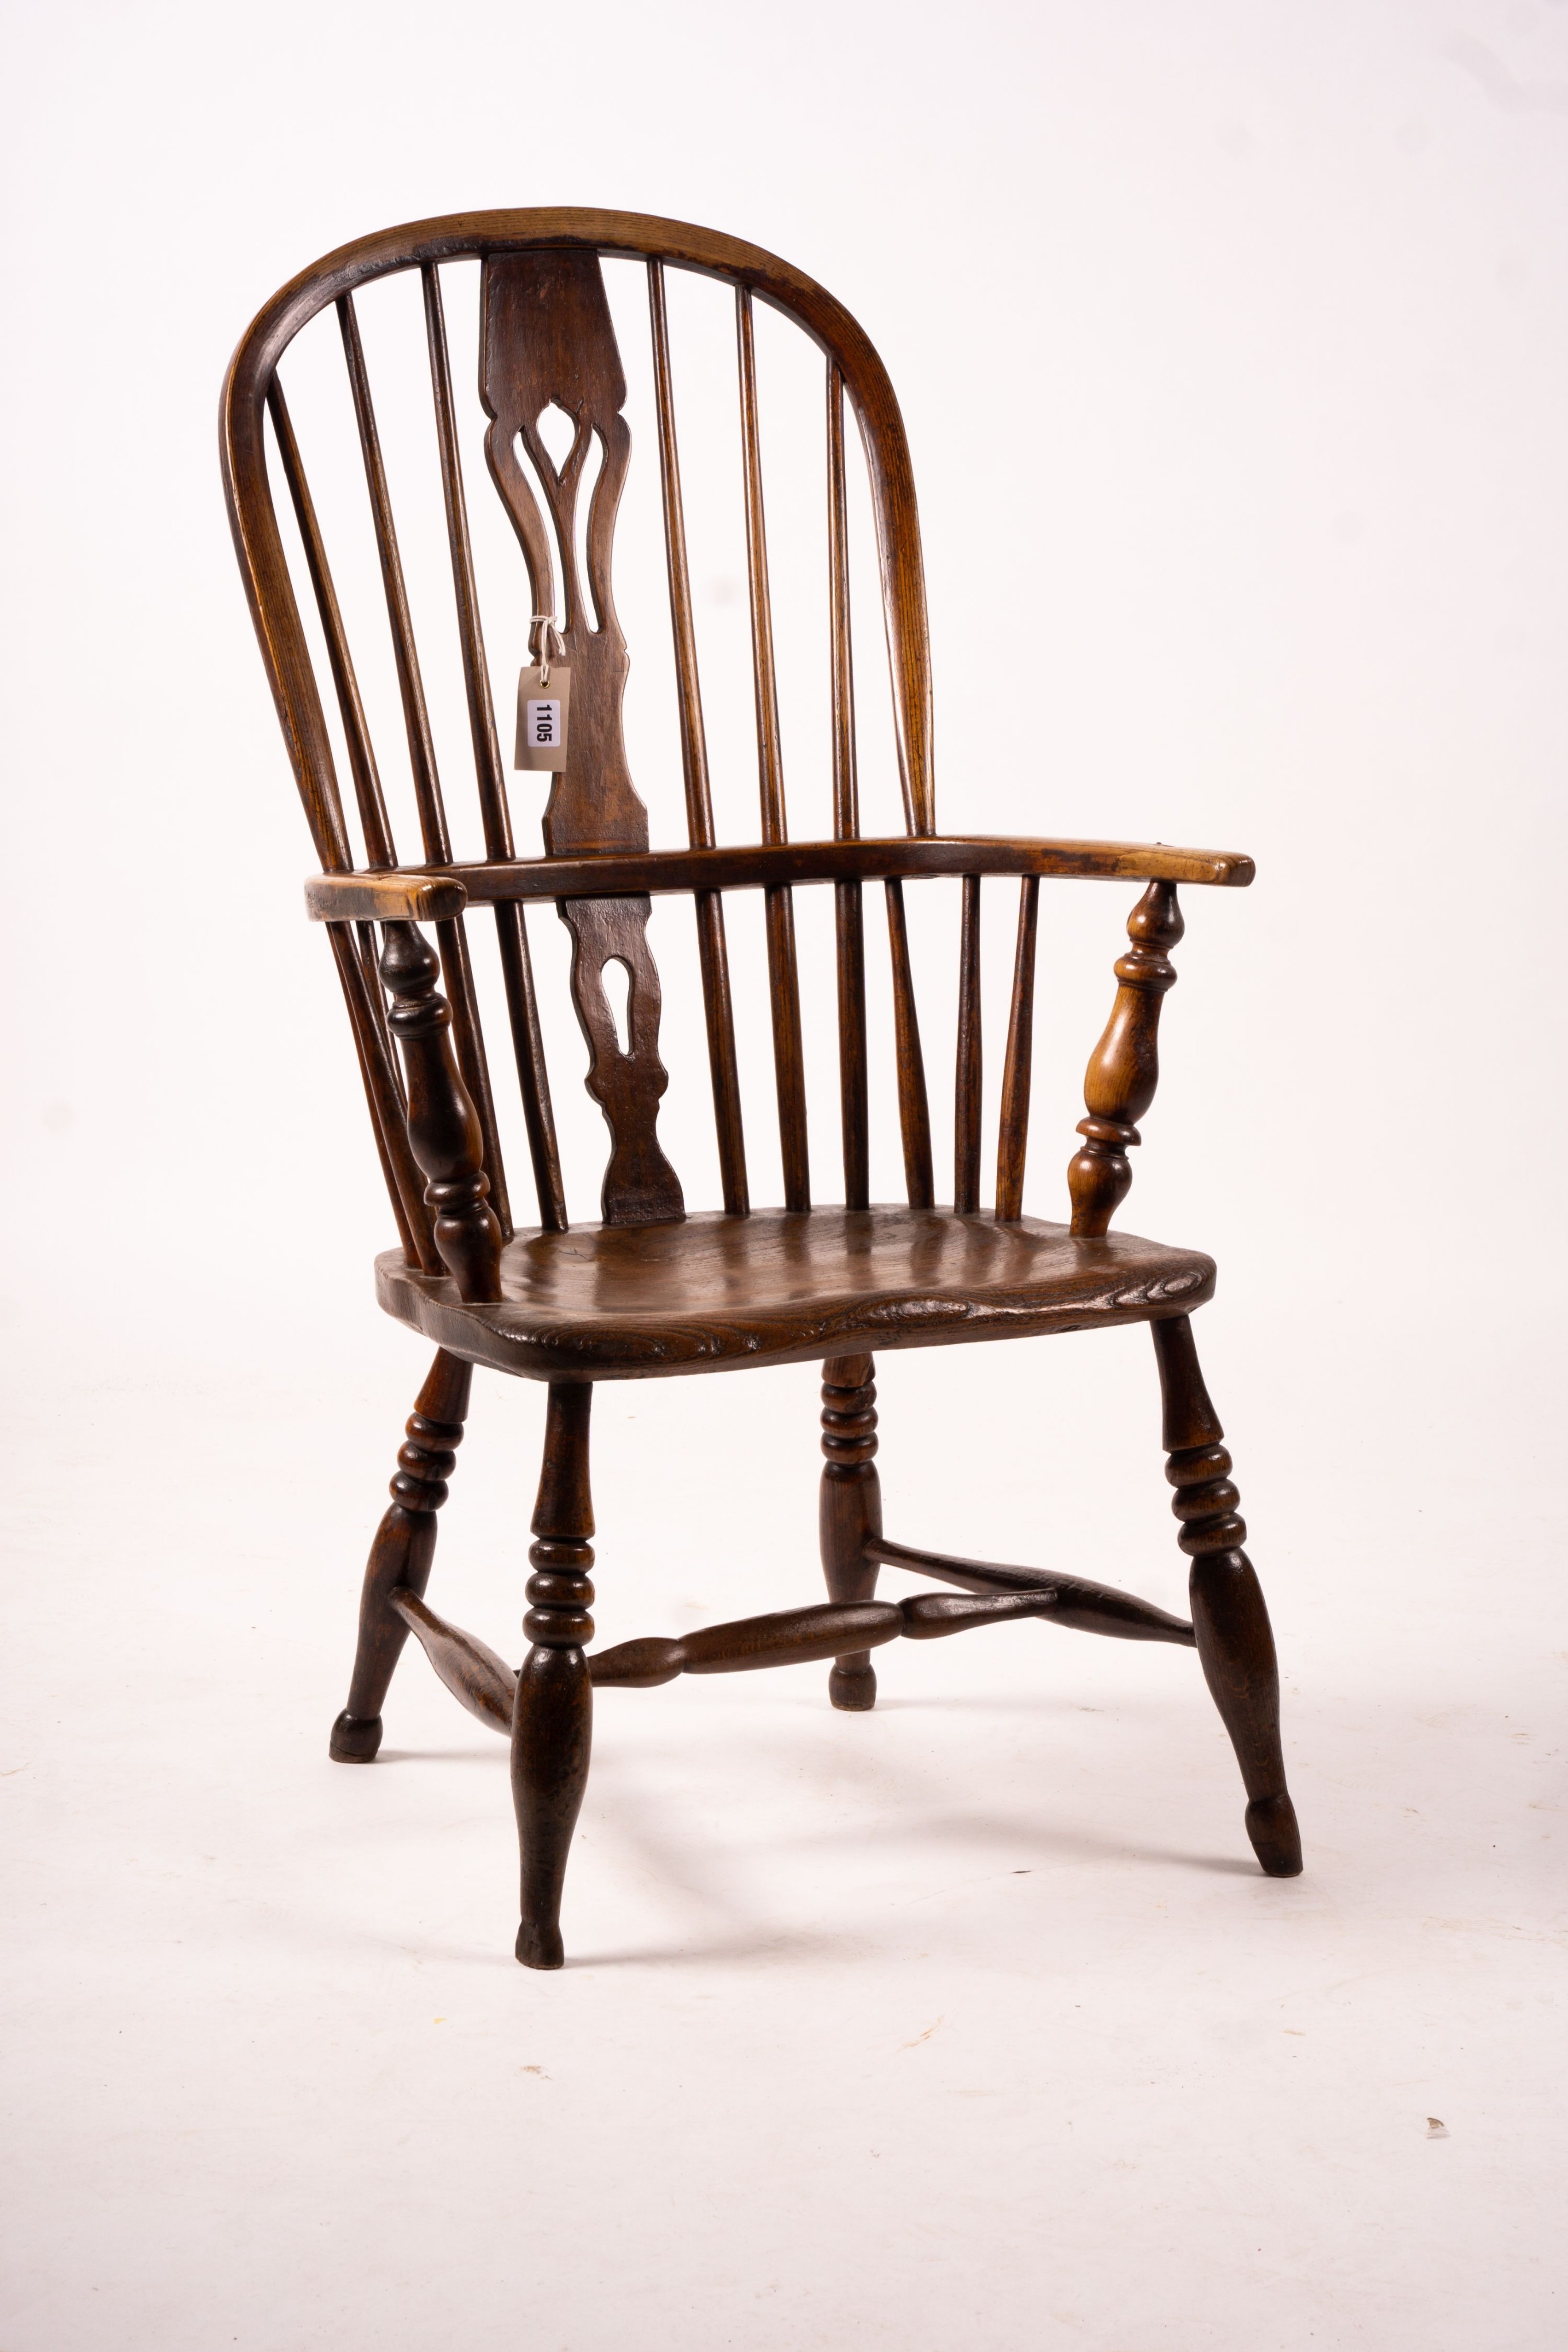 An early 19th century ash, elm and fruitwood Derbyshire area Windsor armchair with 'H' stretcher, width 56cm, depth 44cm, height 106cm